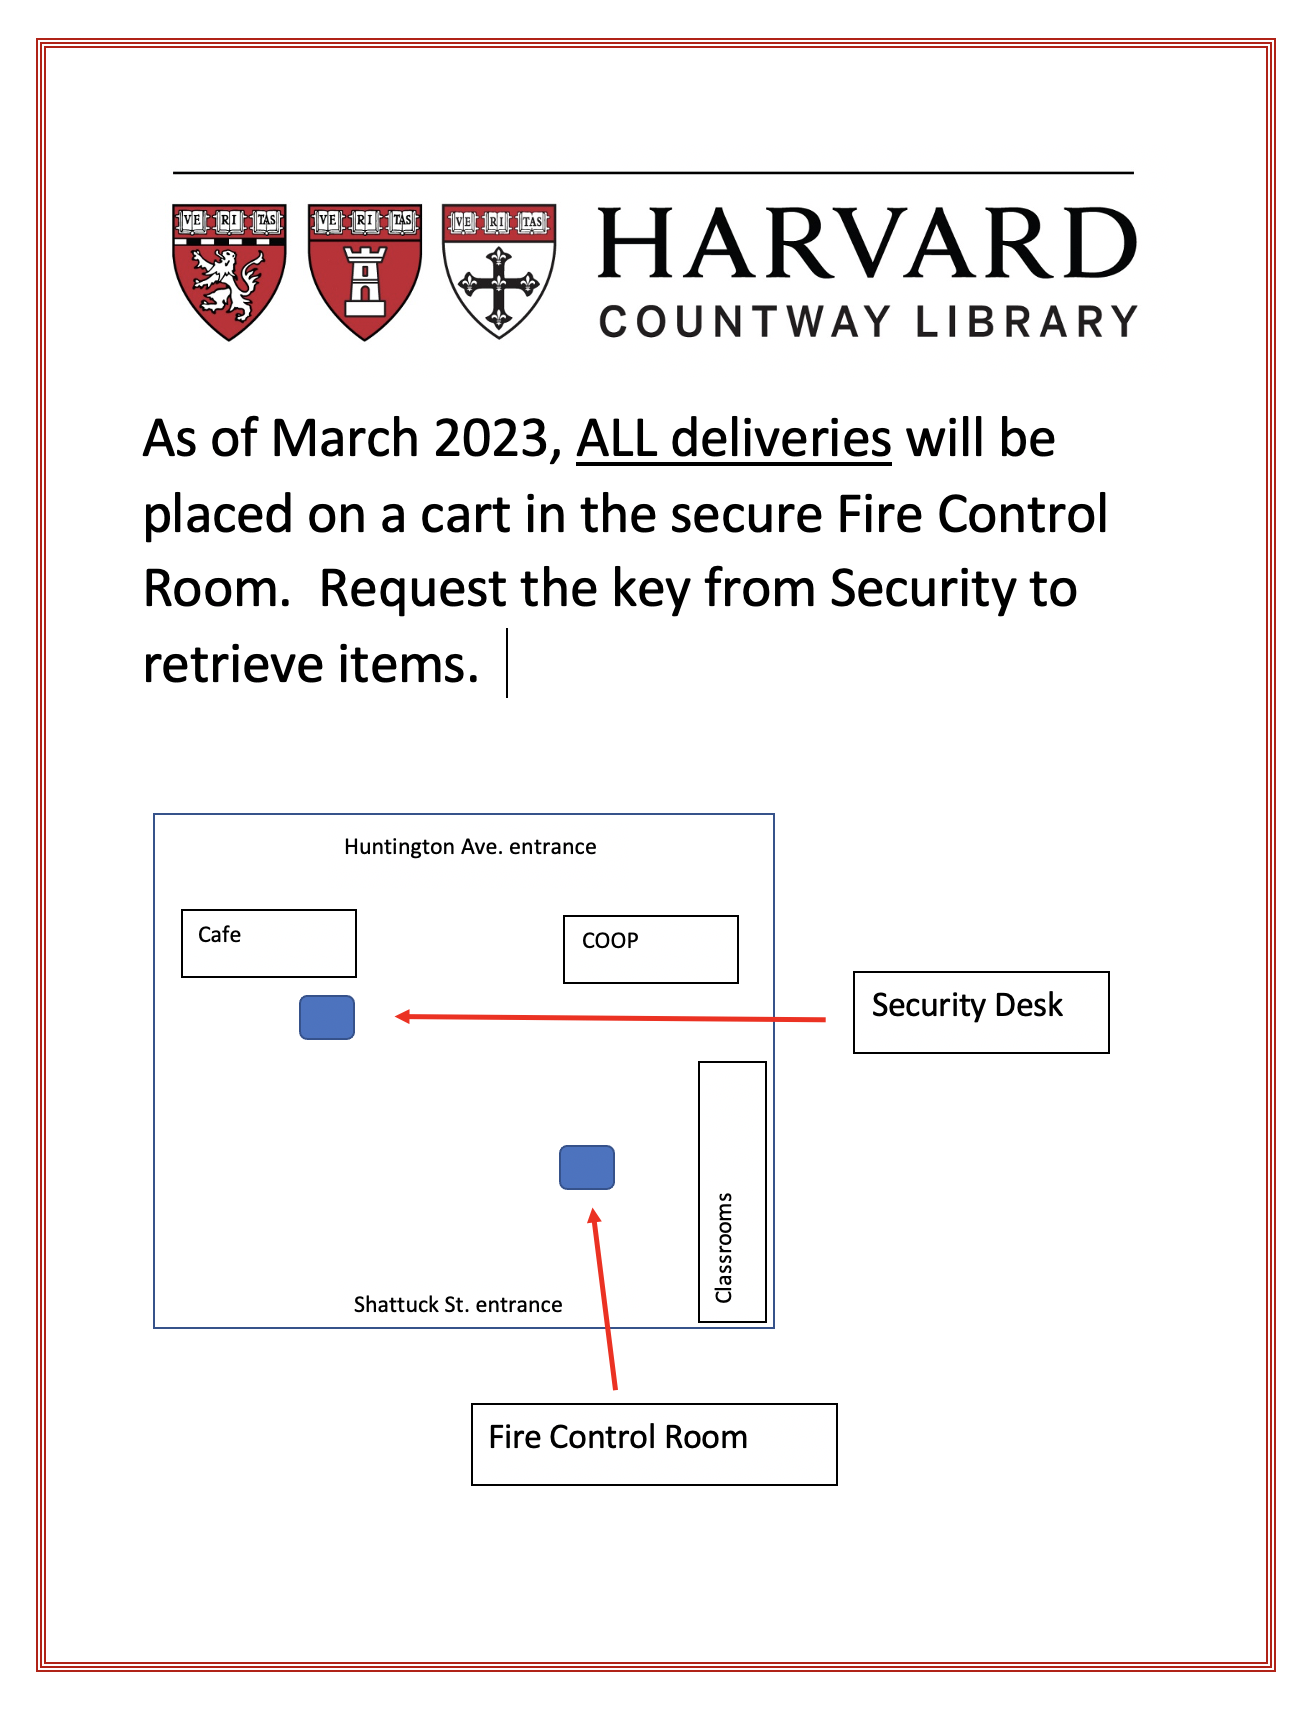 As of March 2023, all deliveries will be placed on a cart in the secure Fire Control Room. Request the key from Security to retrieve items. The Fire Control Room is between the classrooms and the Shattuck St. entrance.